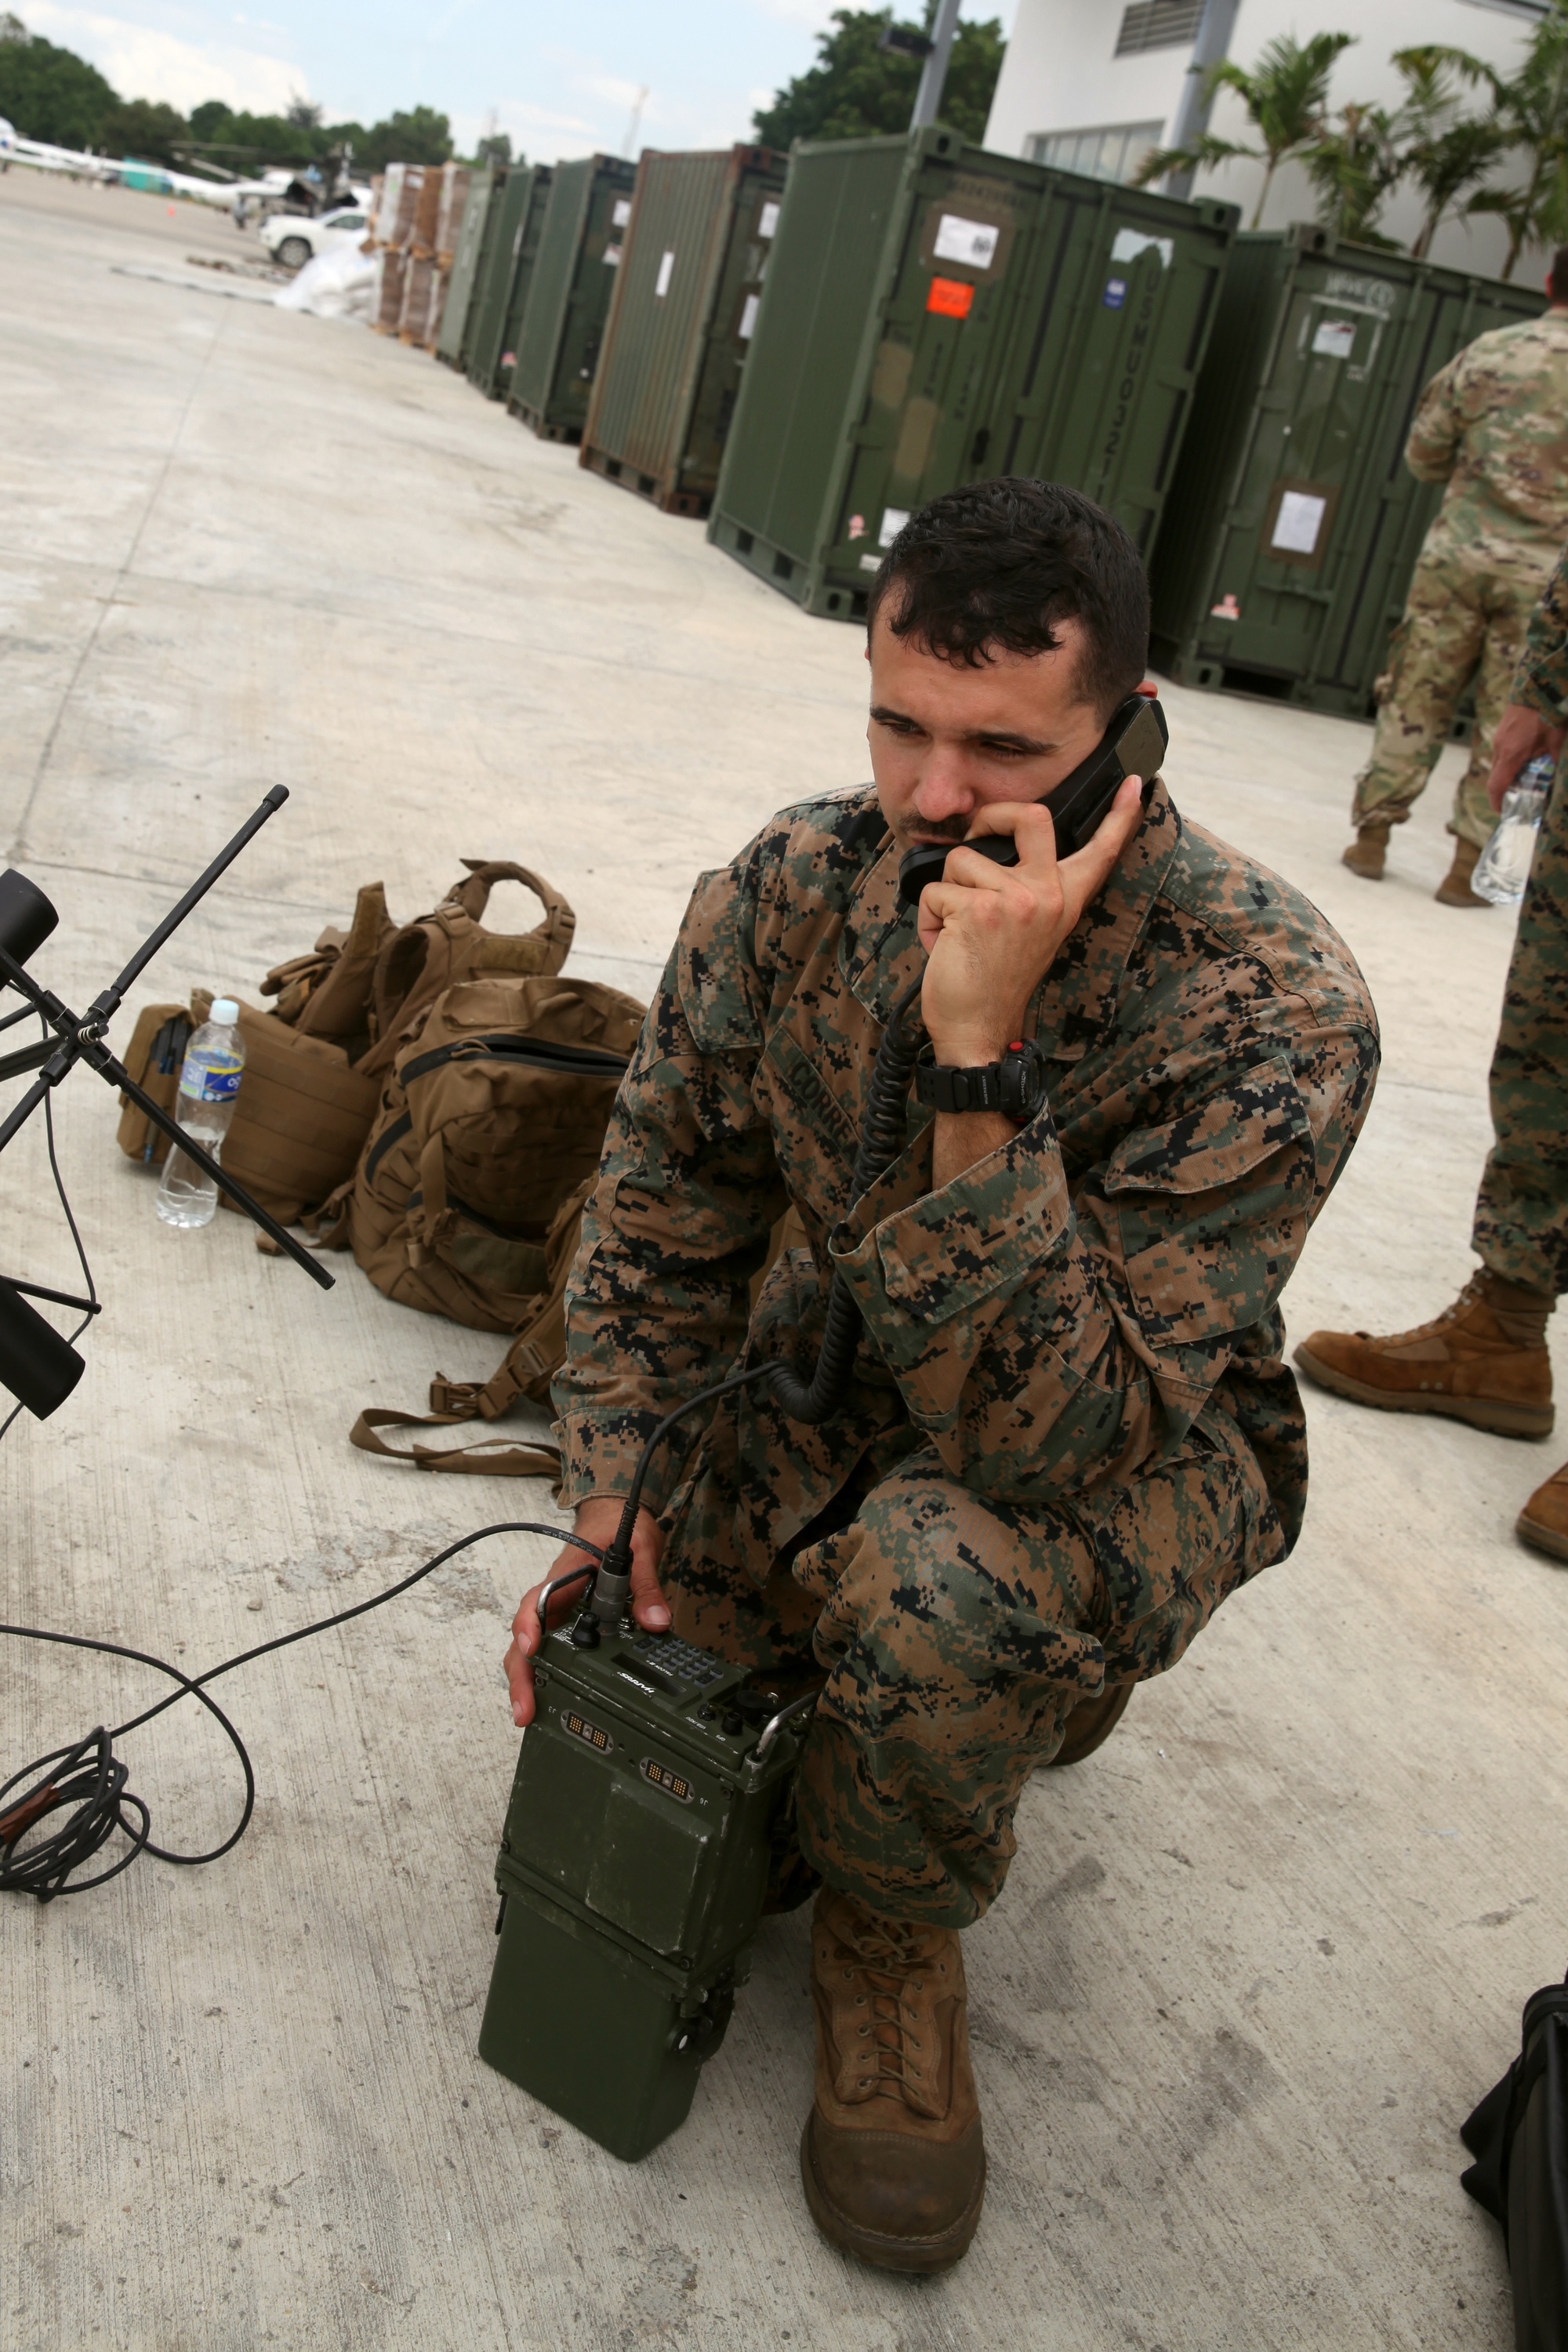 DVIDS - Images - 24th MEU radio operator check comms while delivering  relief supplies with JTF Matthew [Image 5 of 10]